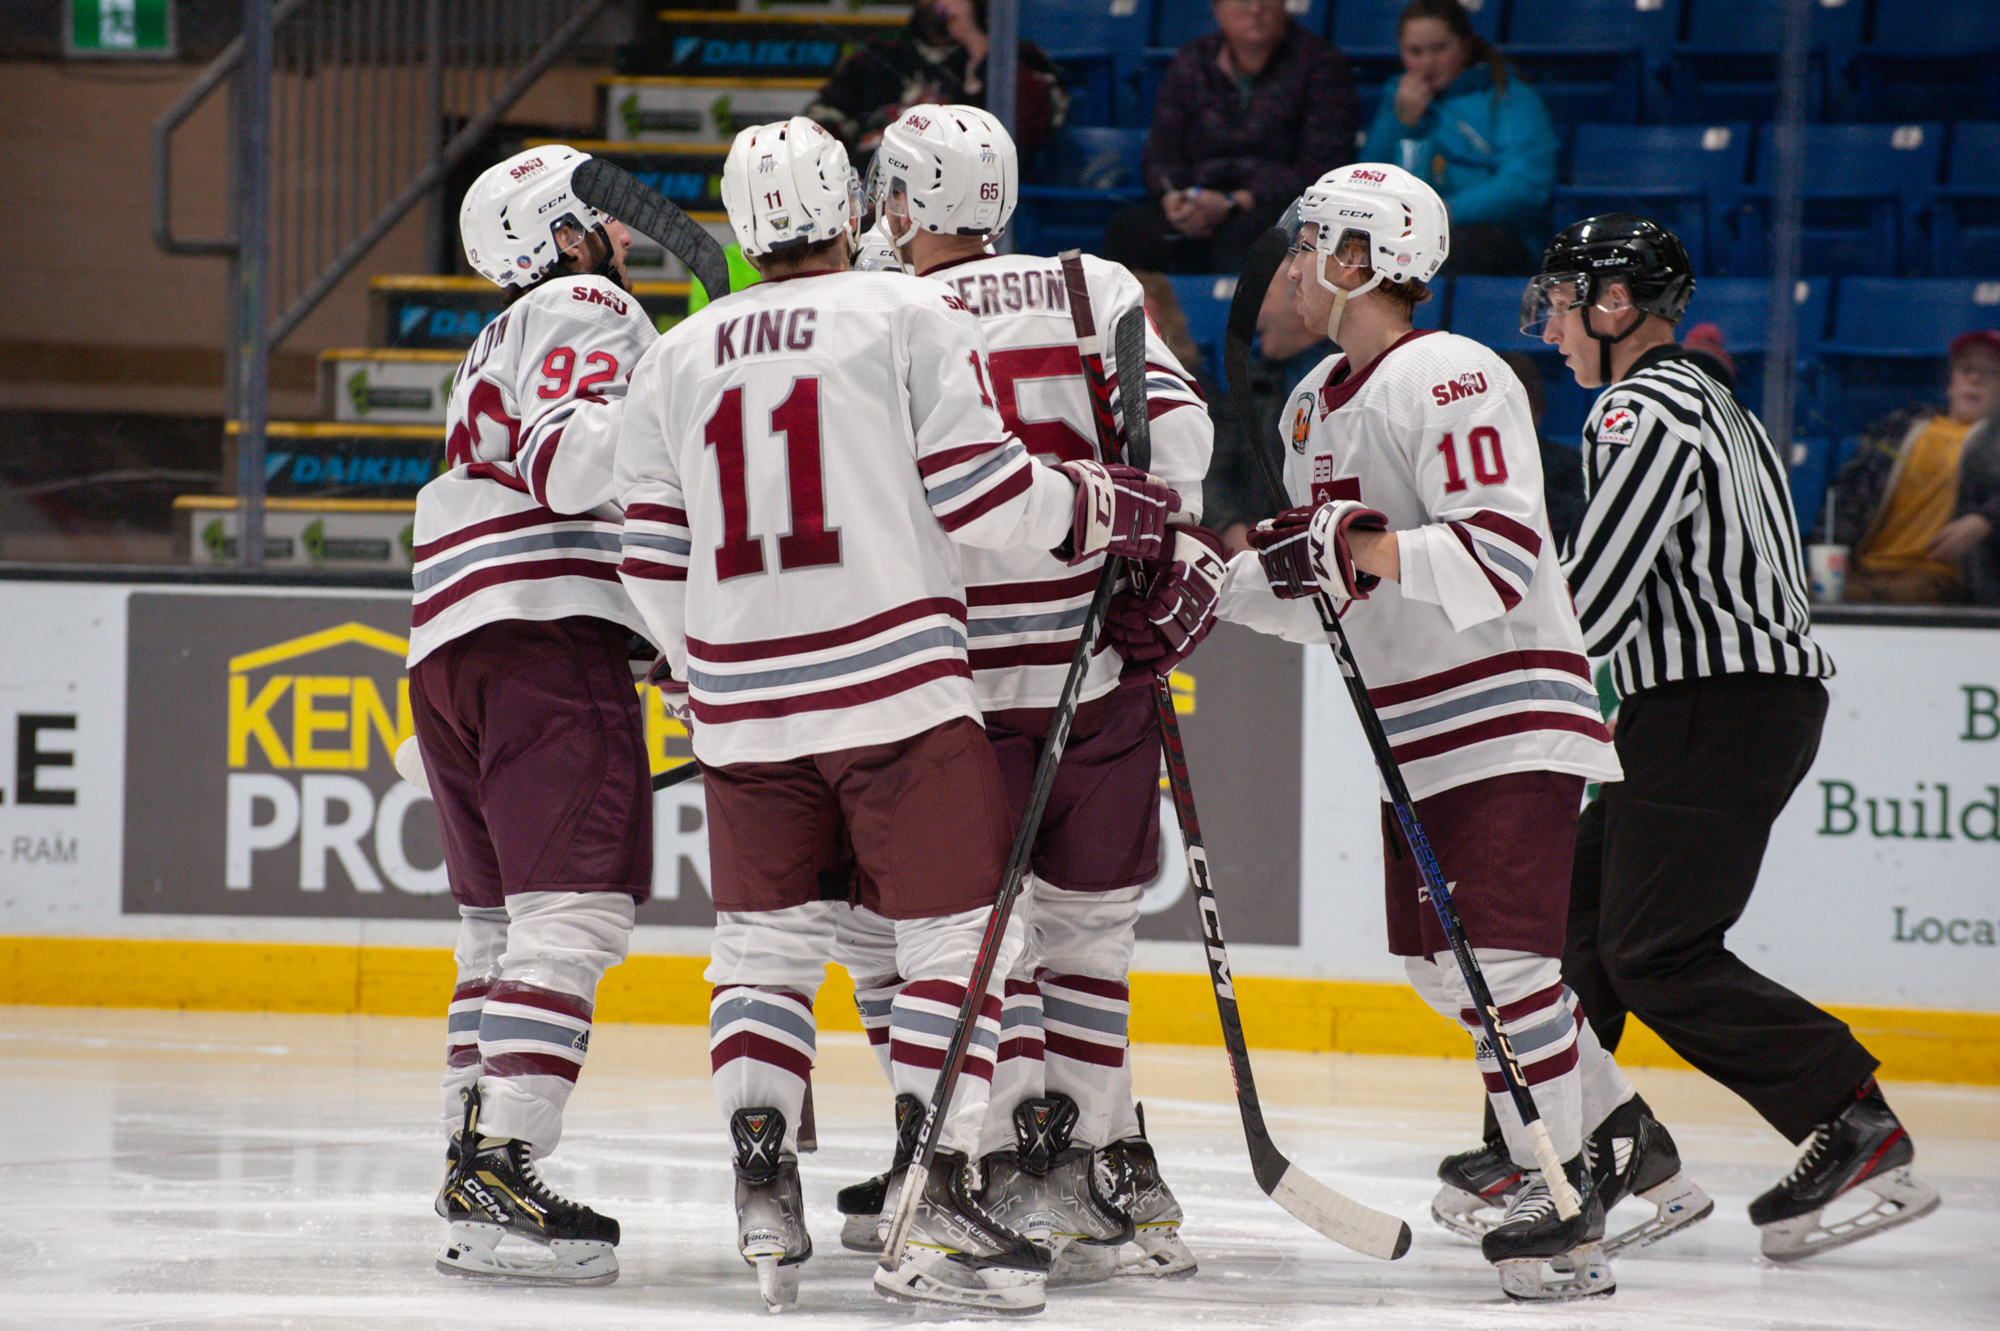 Huskies win third straight, pass Panthers in standings with 5-2 victory